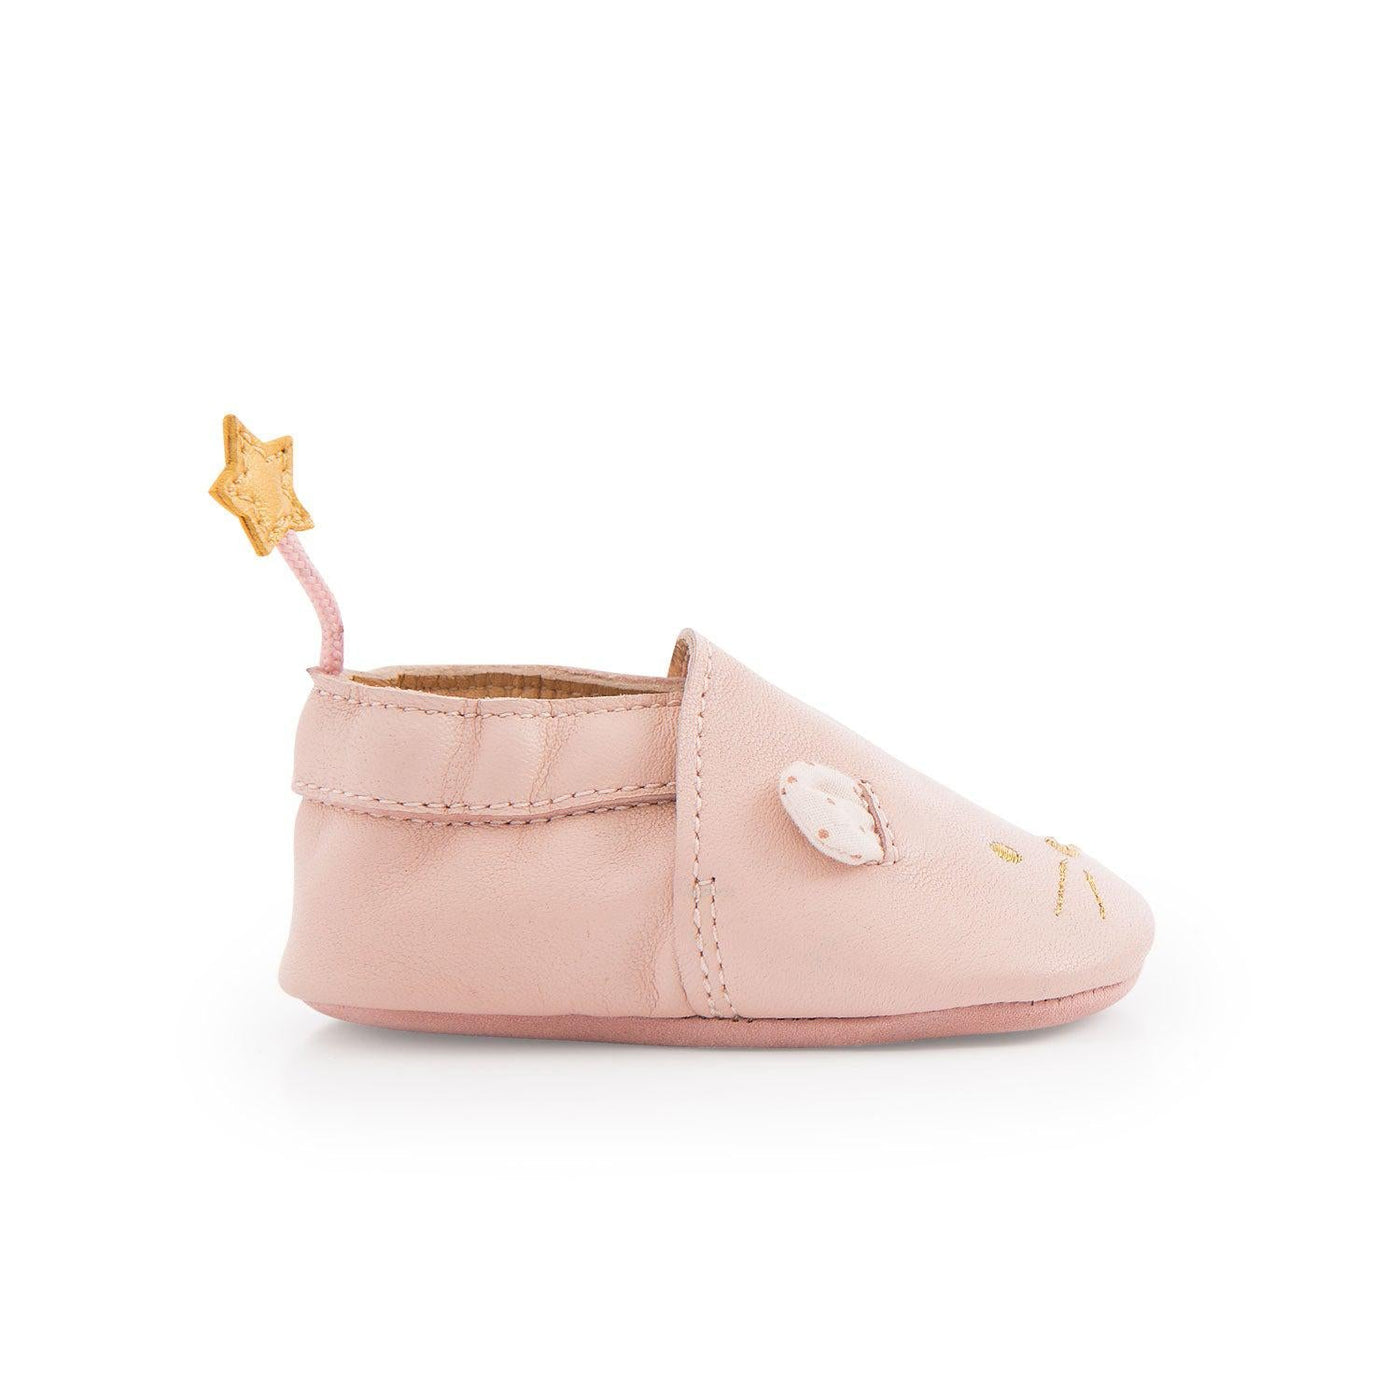 Pink Leather Slippers - Il Était Une Fois-Baby Shoes-Moulin Roty-Yes Bebe